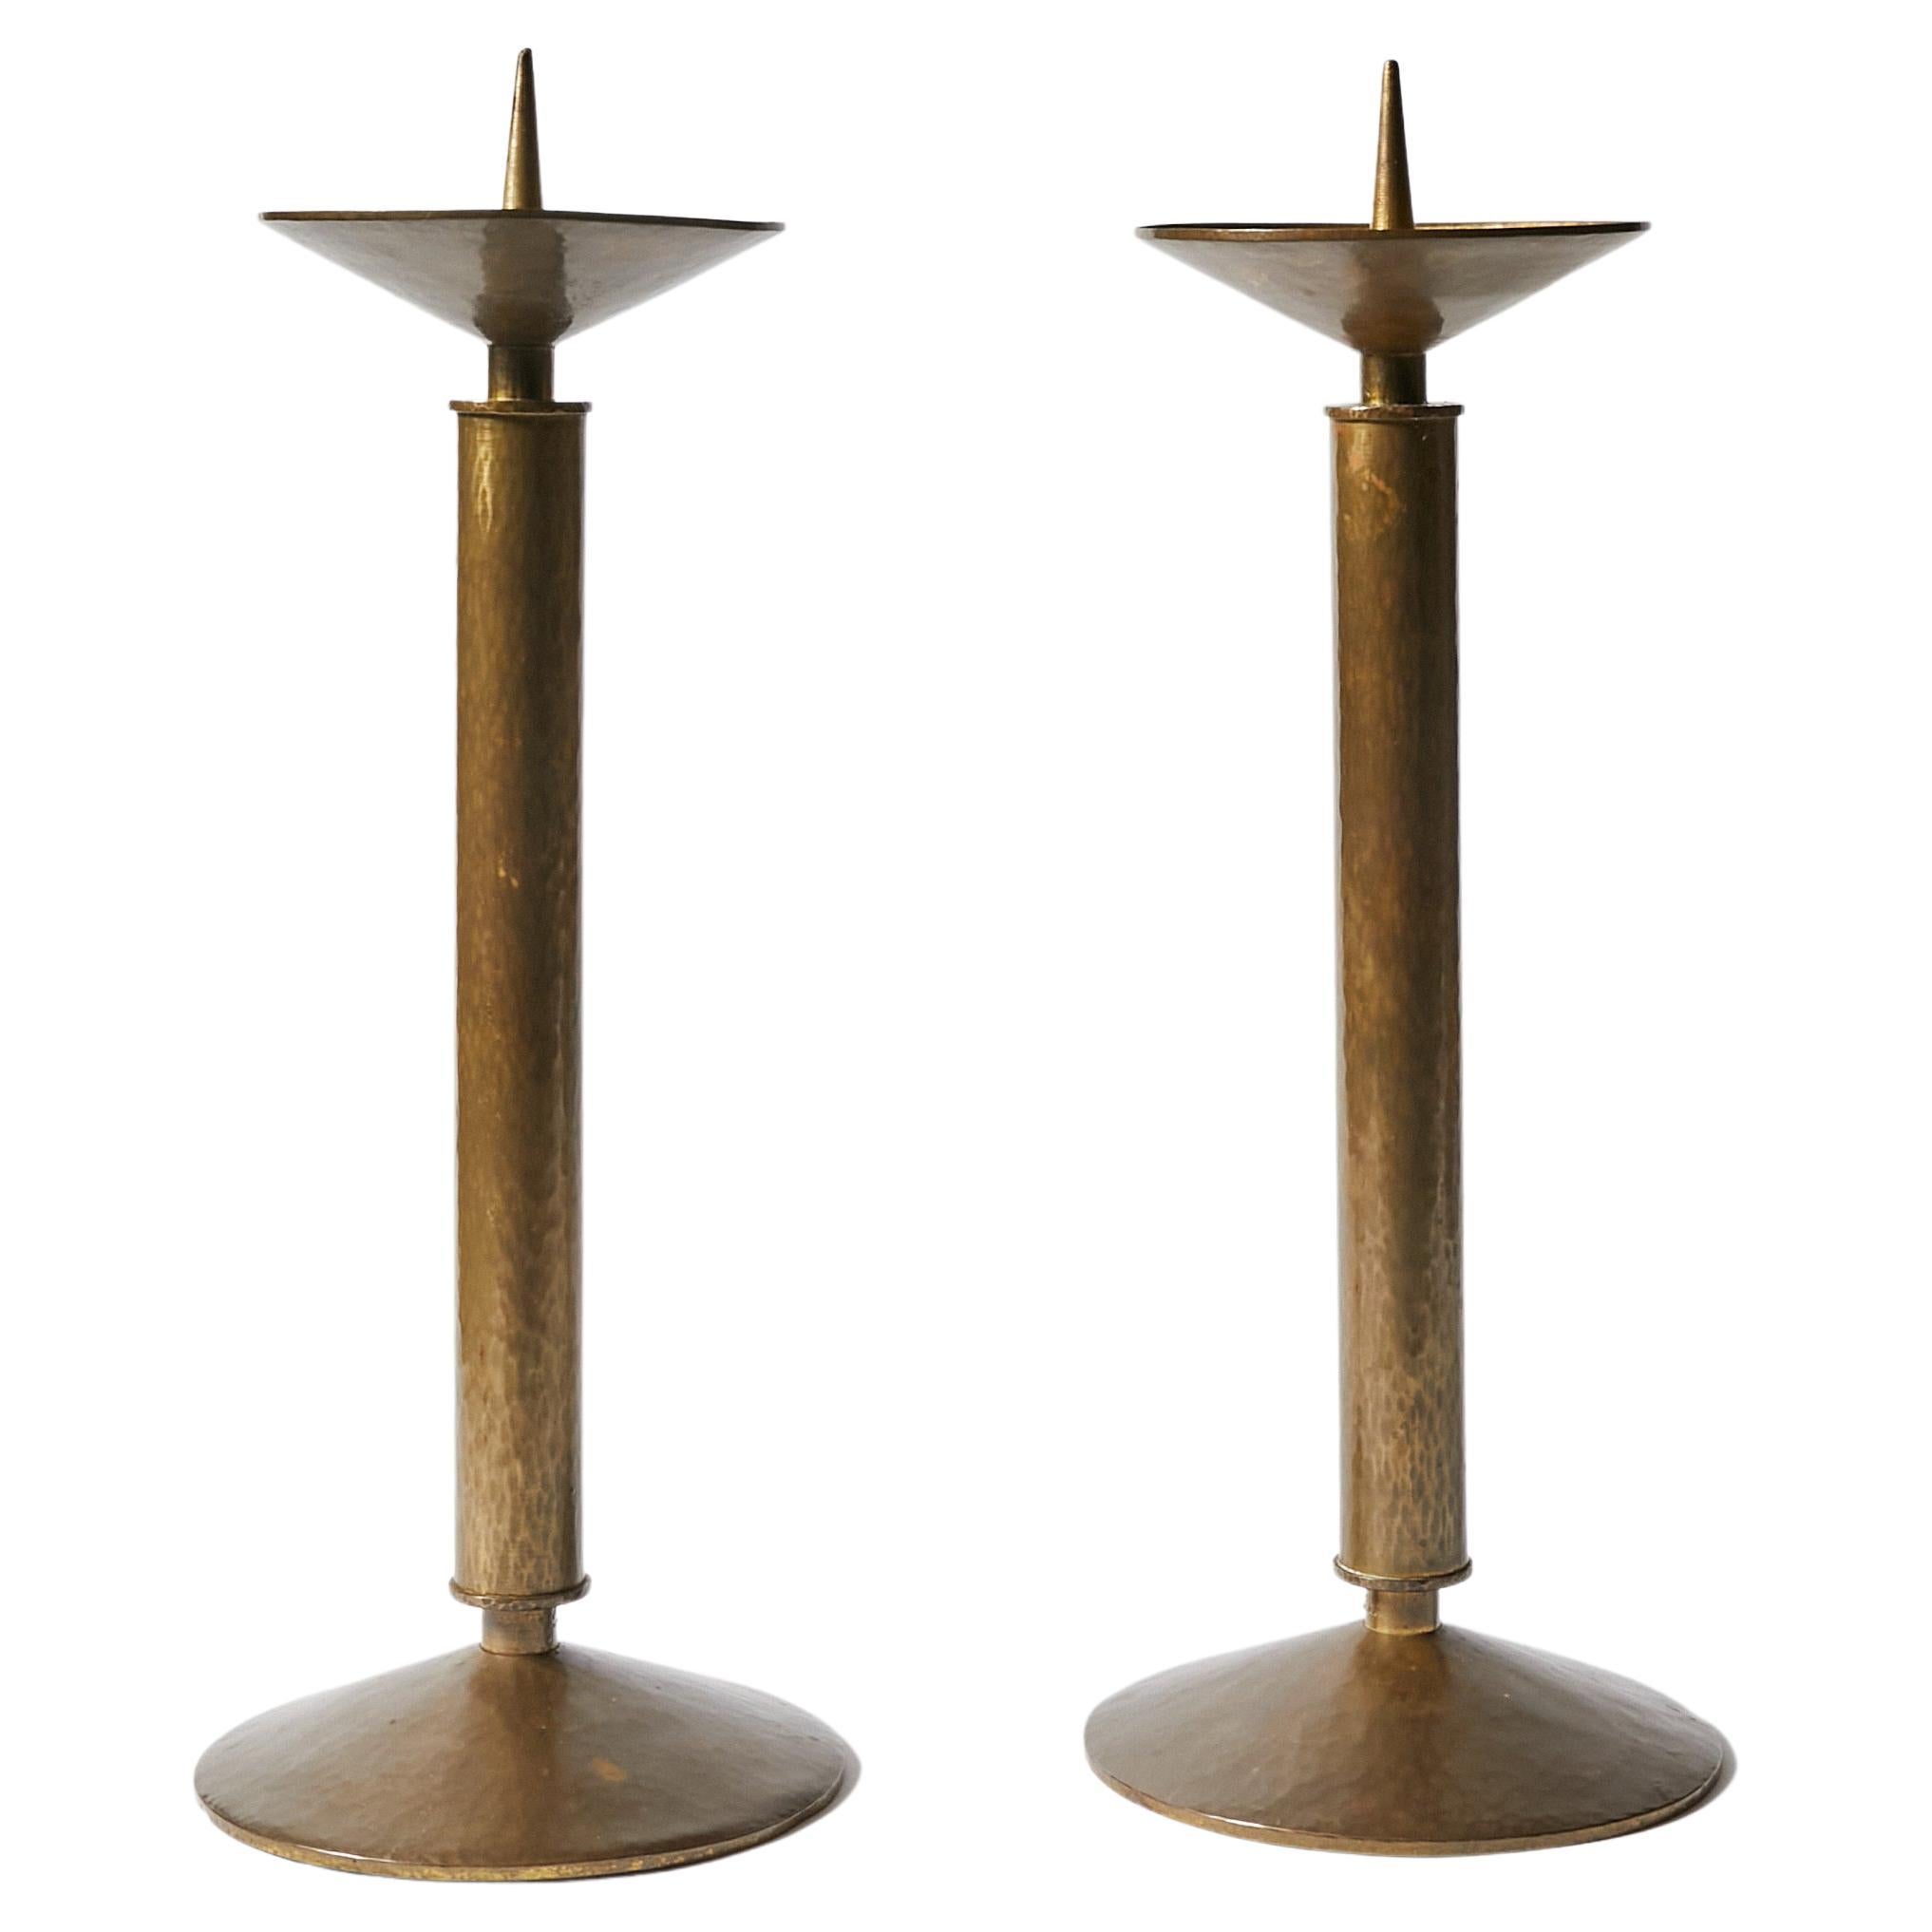 Pair of Large Art Deco Style Candle Holders